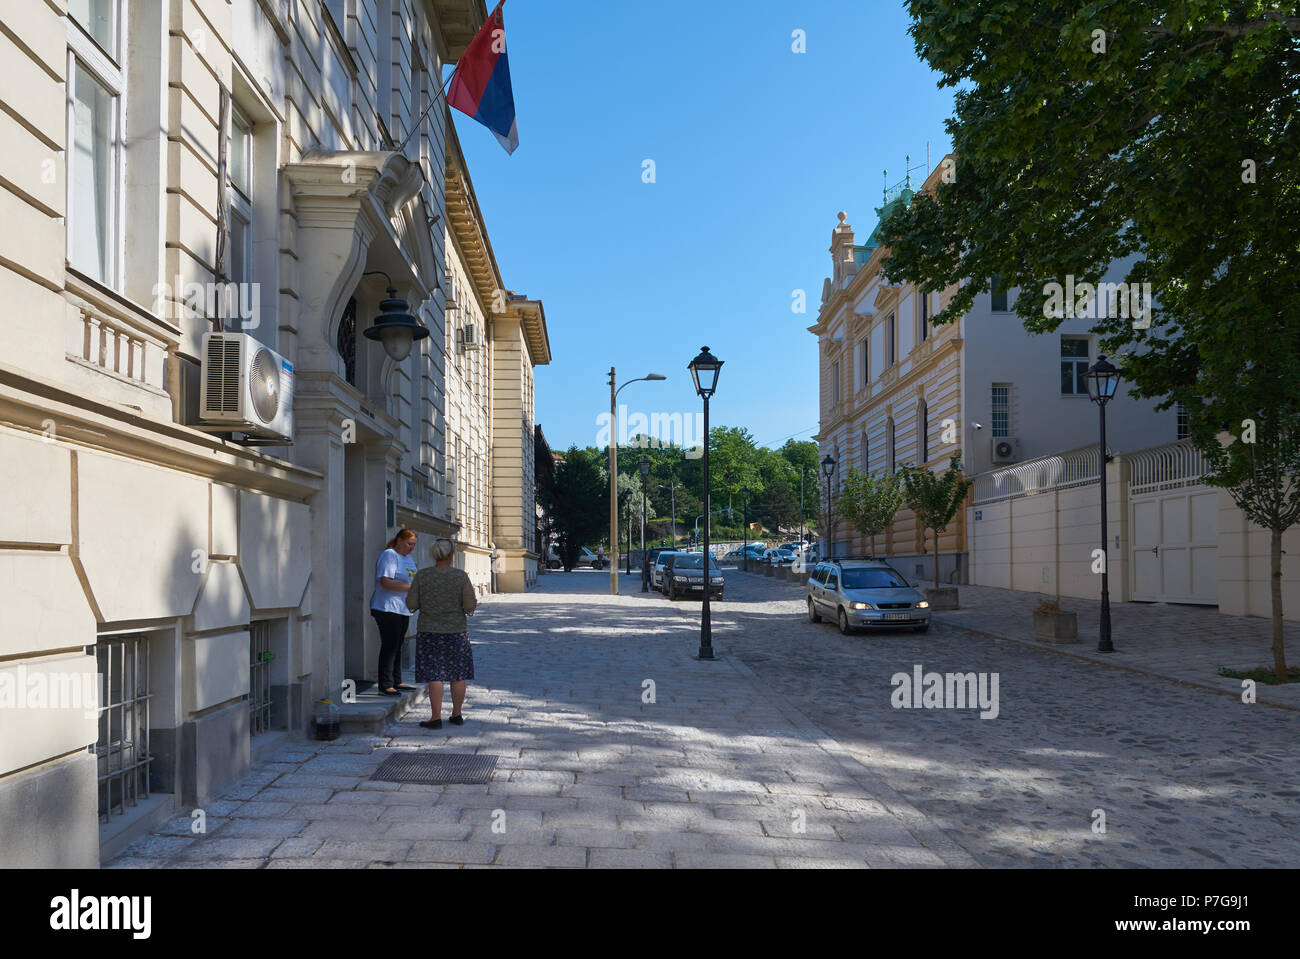 Belgrade, Serbia - May 03, 2018: Morning view on Kosancicev venac street with beautiful old houses on it. Two middle aged women smoking outdoors. Stock Photo